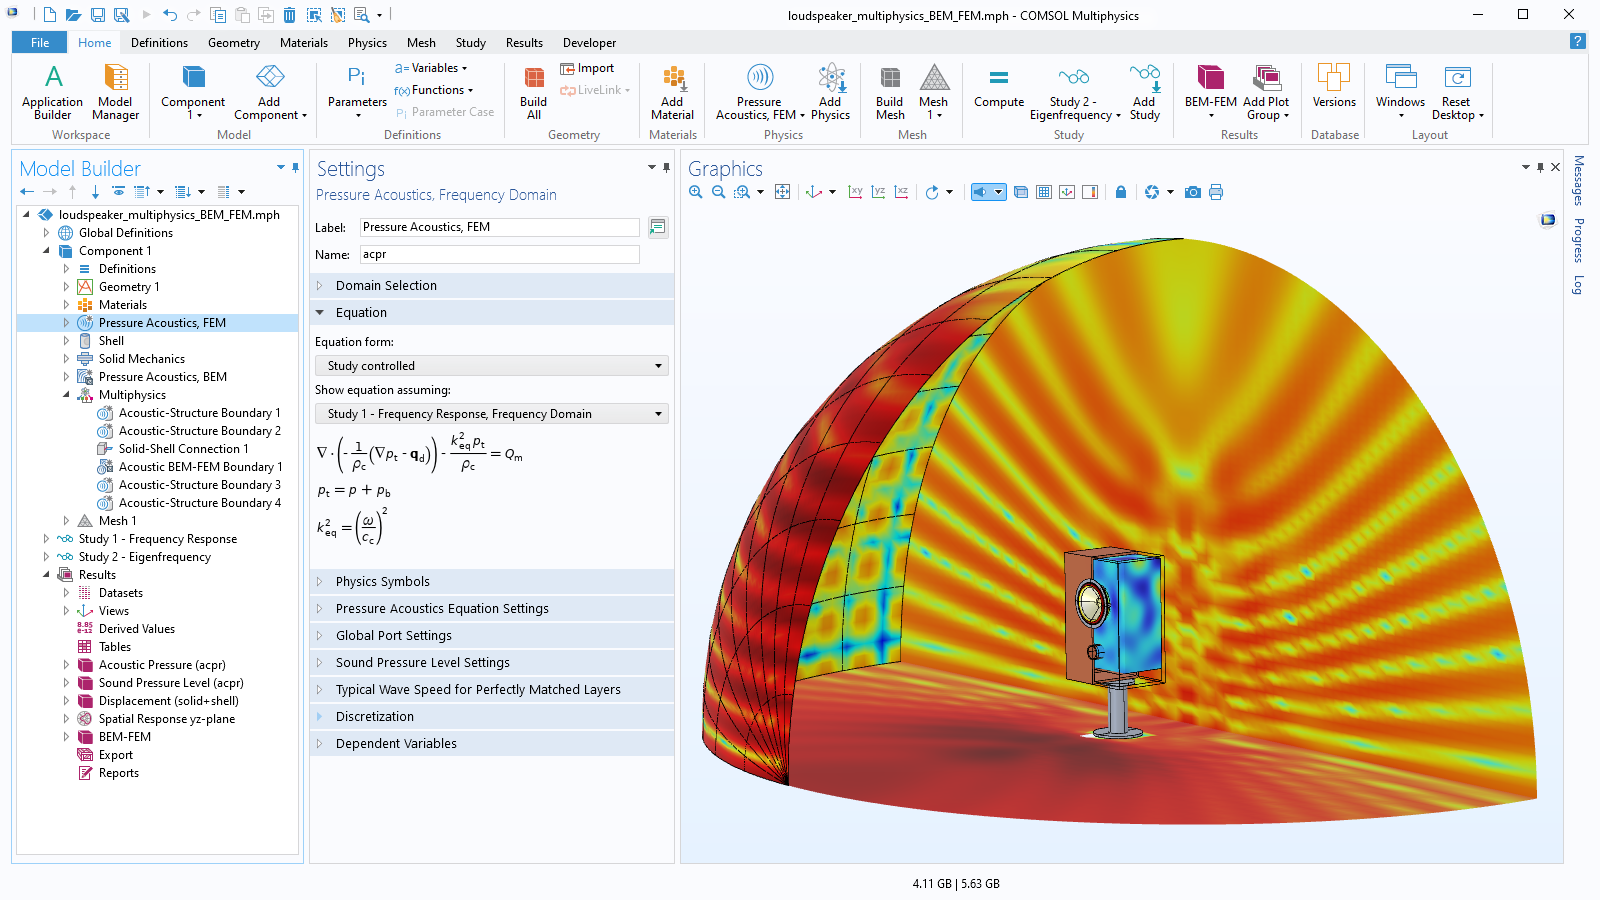 The COMSOL Multiphysics UI showing the Model Builder with the Pressure Acoustics node highlighted, the corresponding Settings window, a loudspeaker model in the Graphics window.